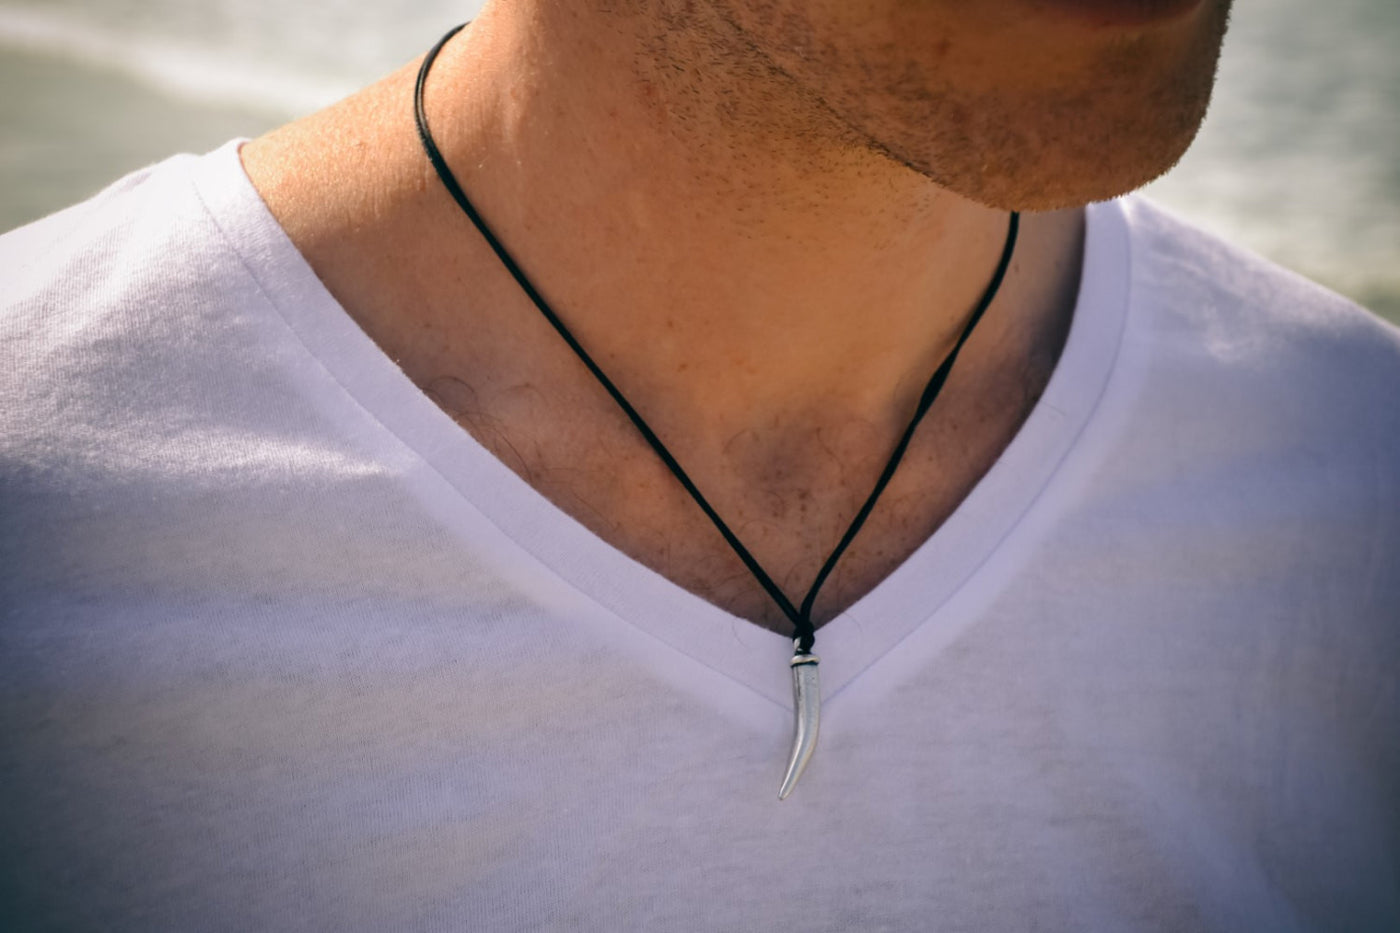 Buy The Bro Code Silver Plated Circular Black Pendant Necklace Online At  Best Price @ Tata CLiQ